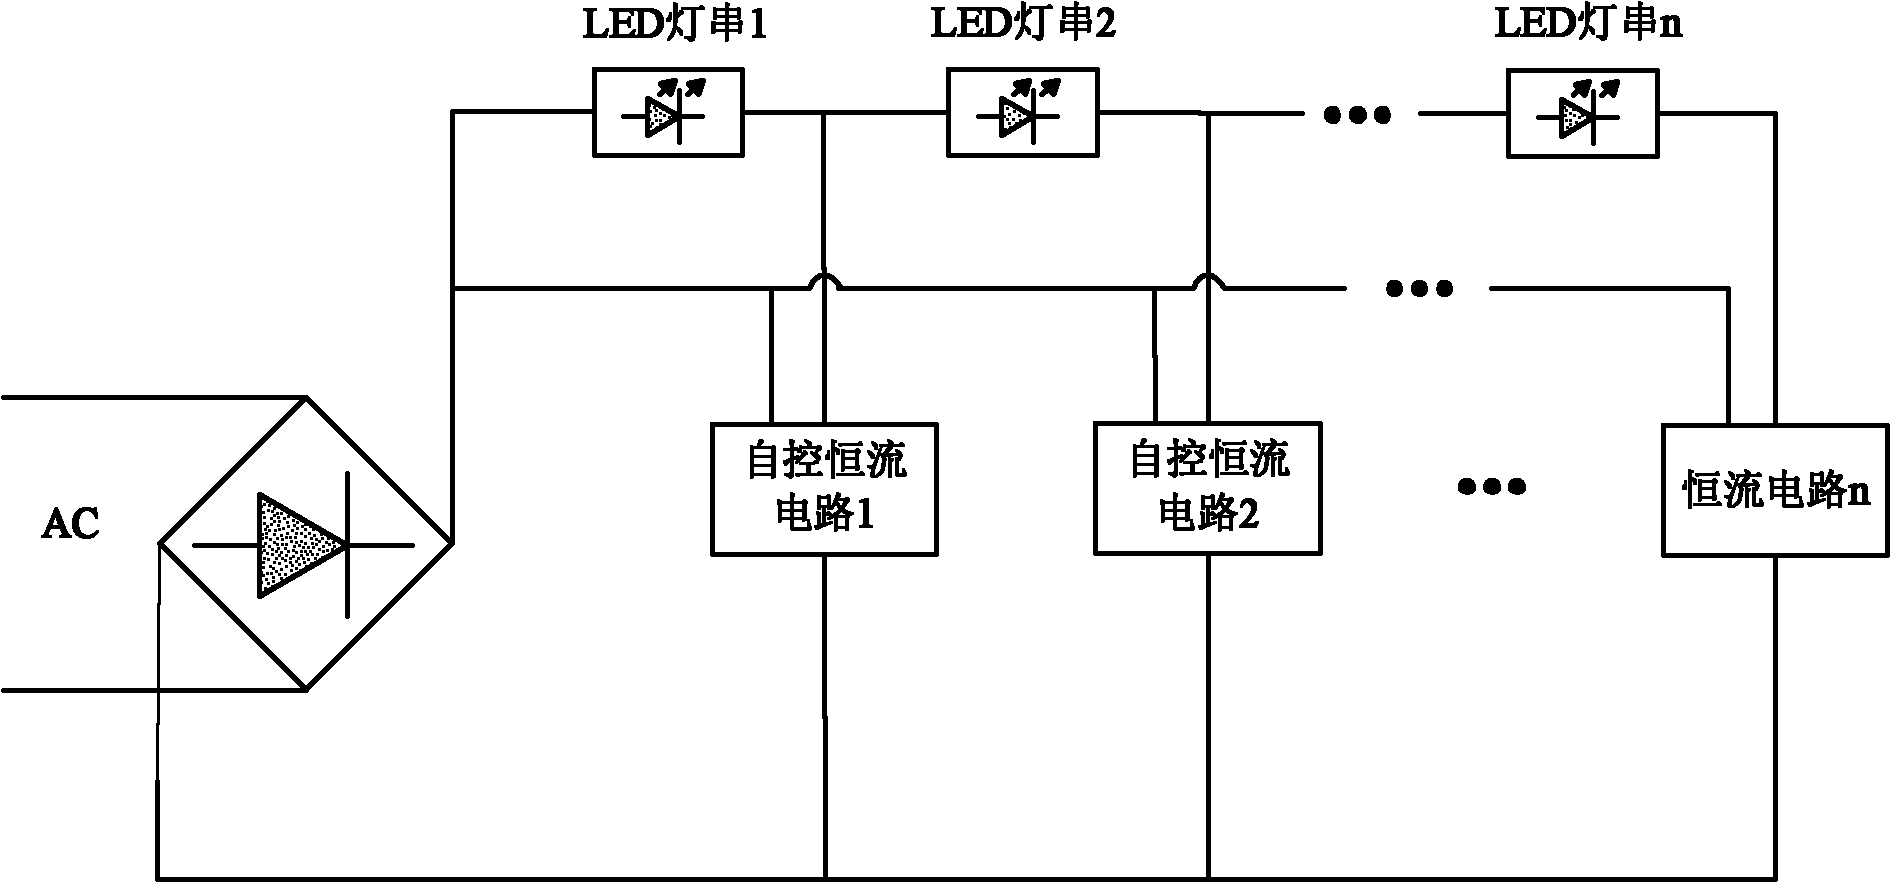 Drive circuit capable of improving power factors of alternating current light emitting diode (AC LED) lamp